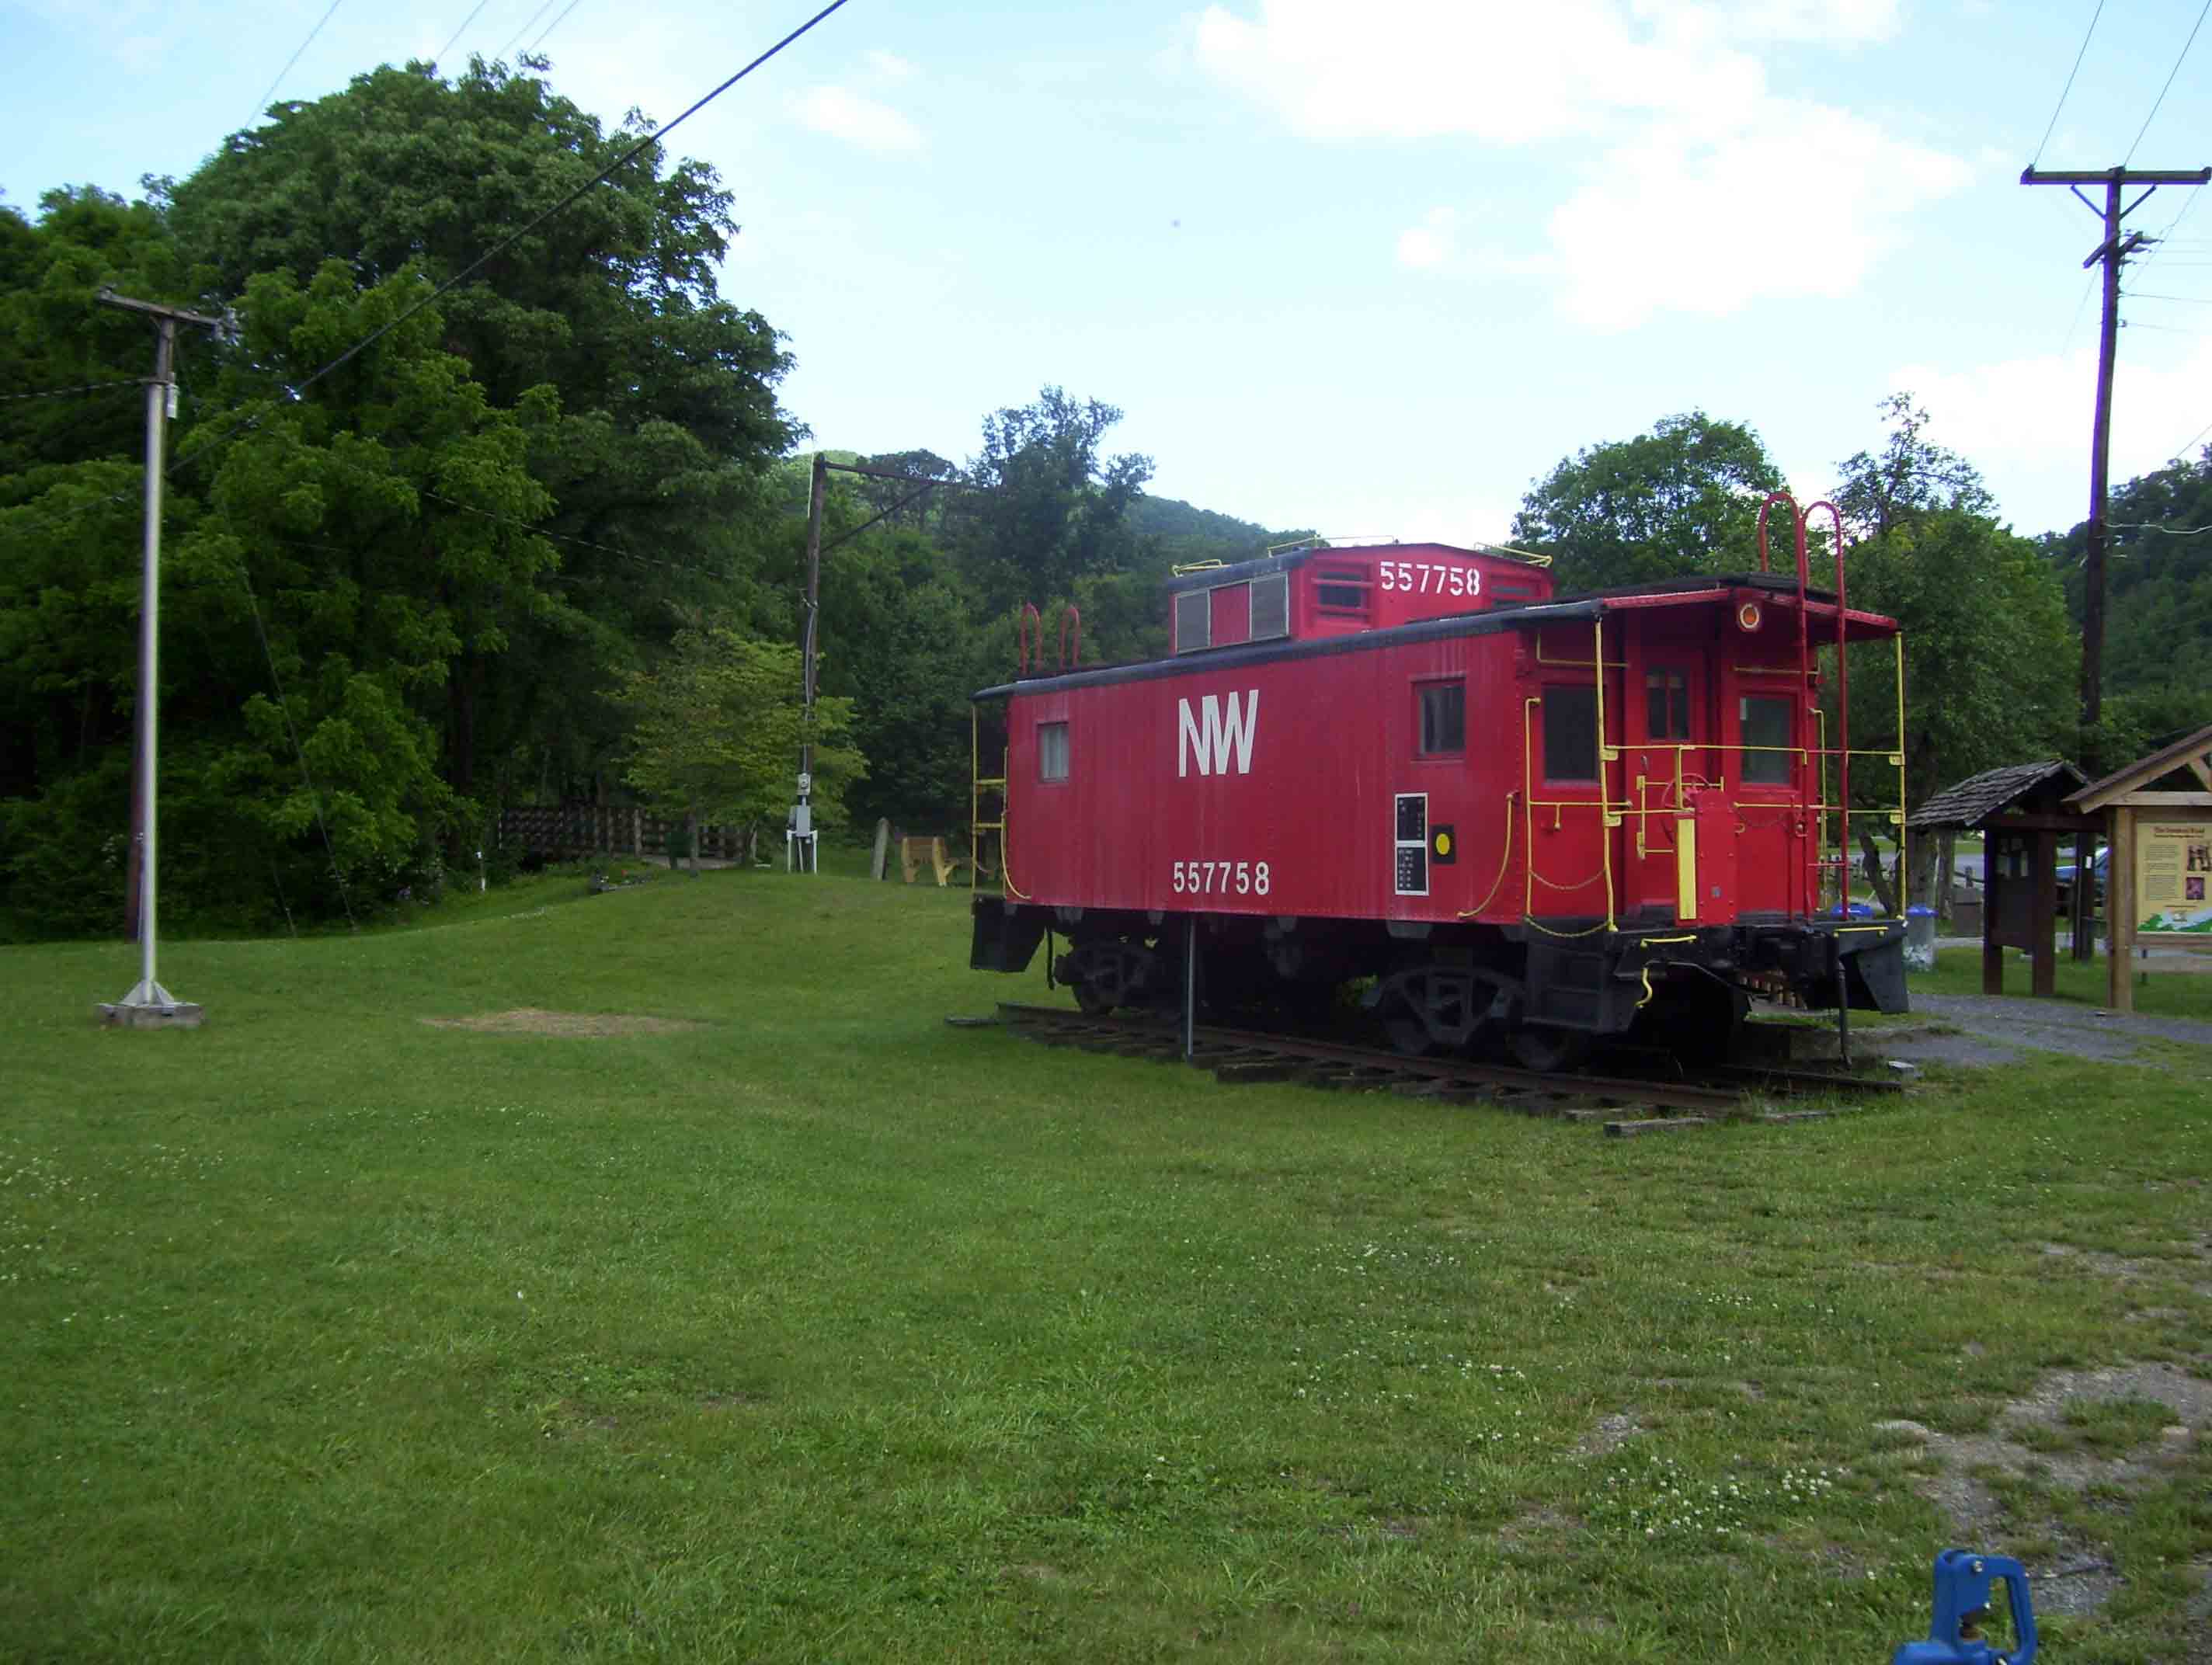 The Little Red Caboose in Damascus. The northbound AT crosses the Virginia Creeper Trail here for the first time. The Creeper is an old railroad bed which has been converted into a biking and hiking trail.   Courtesy dlcul@conncoll.edu